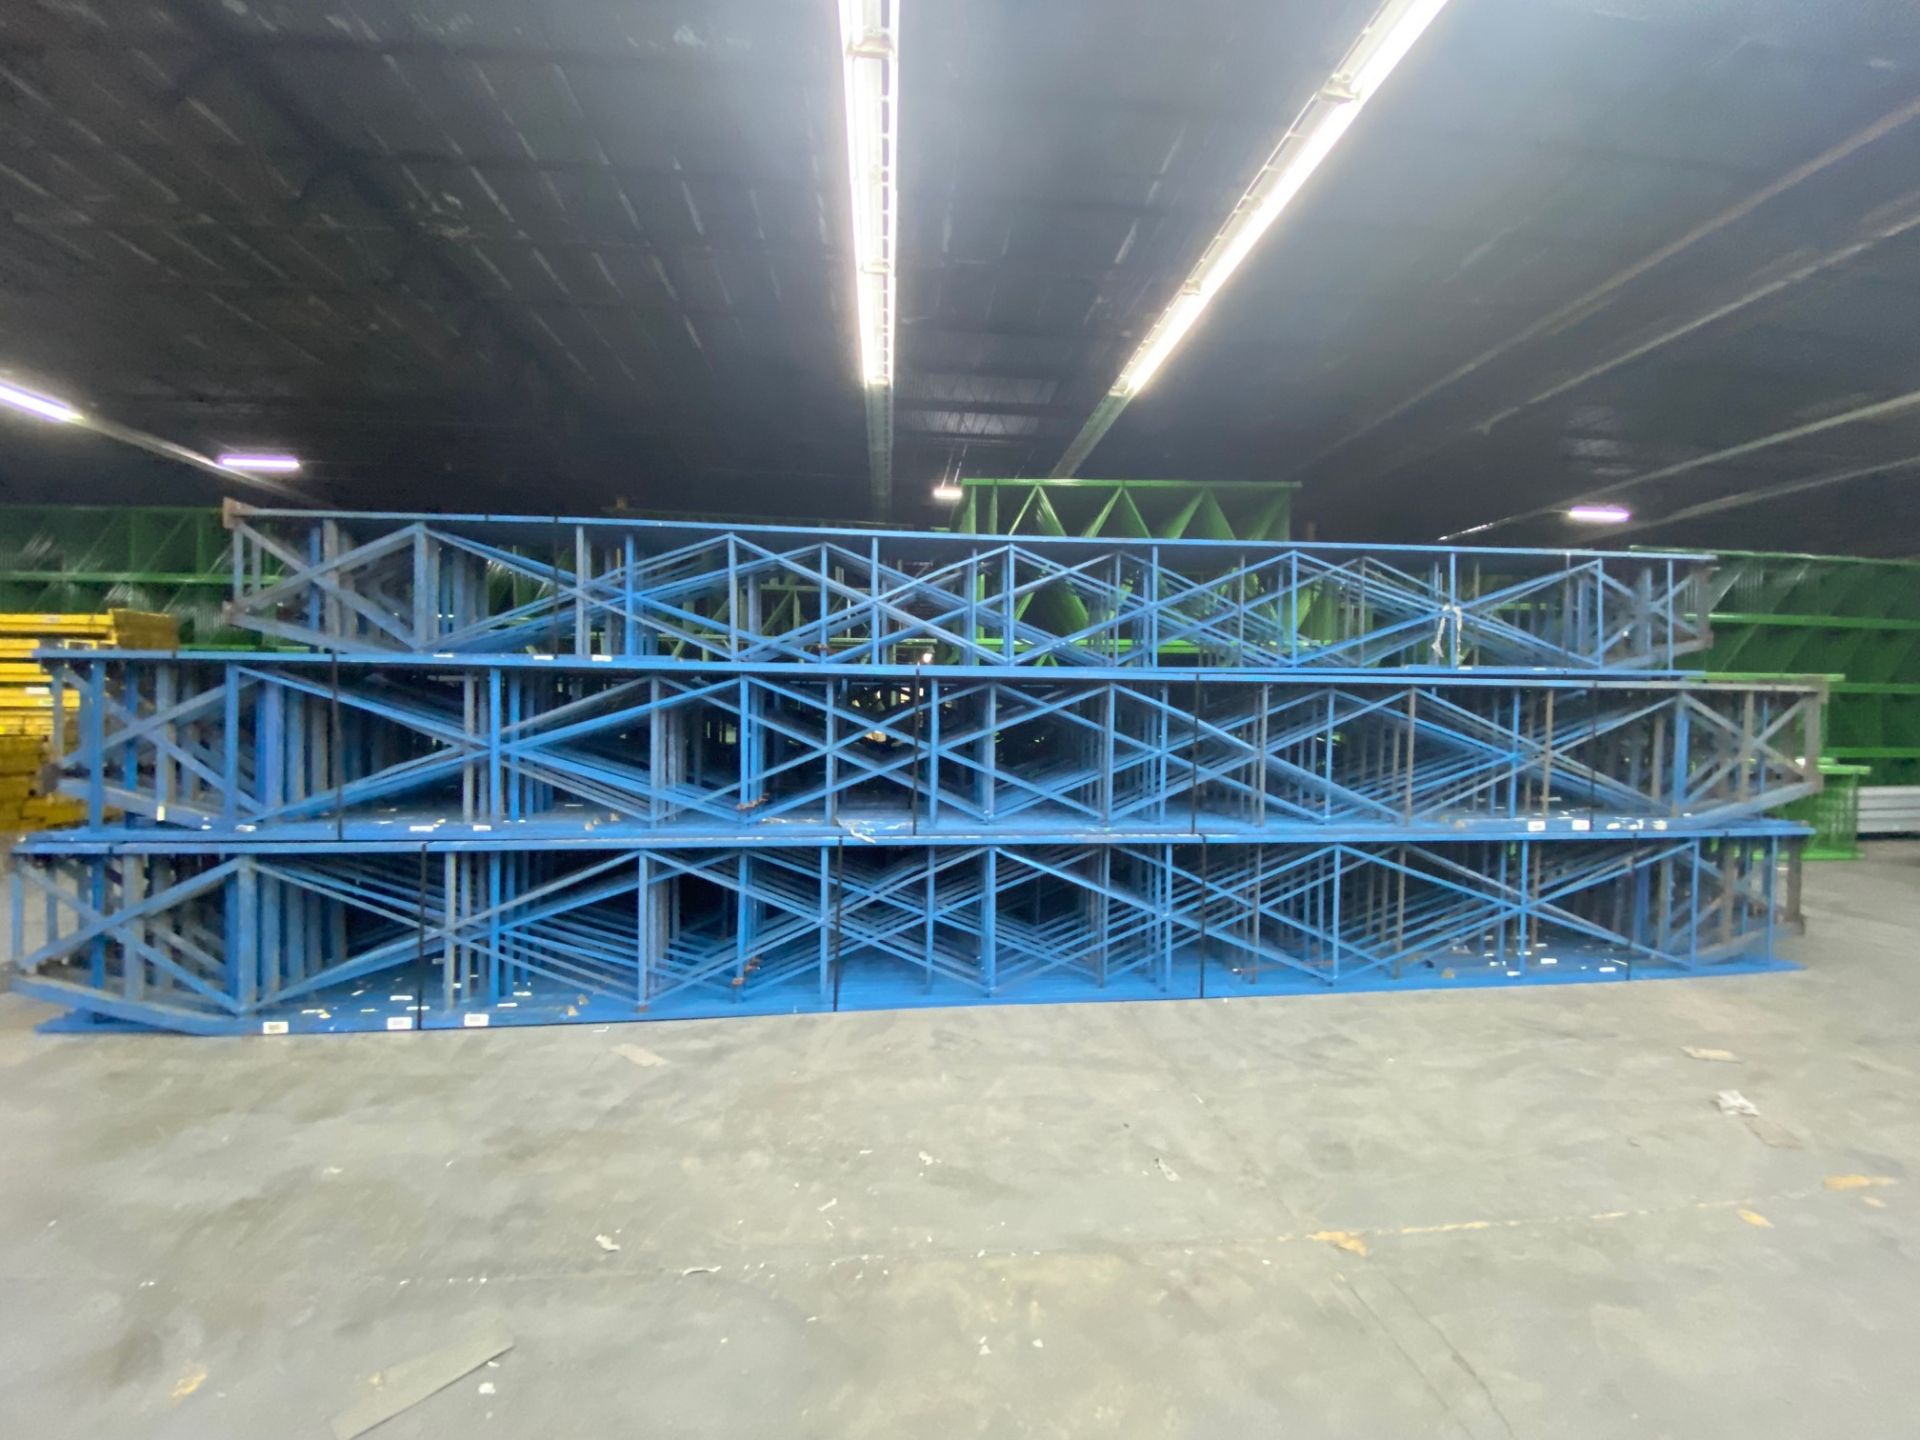 USED 30 PCS OF STRUCTURAL UPRIGHT. SIZE 33'H X 36"D, BLUE - Image 2 of 4